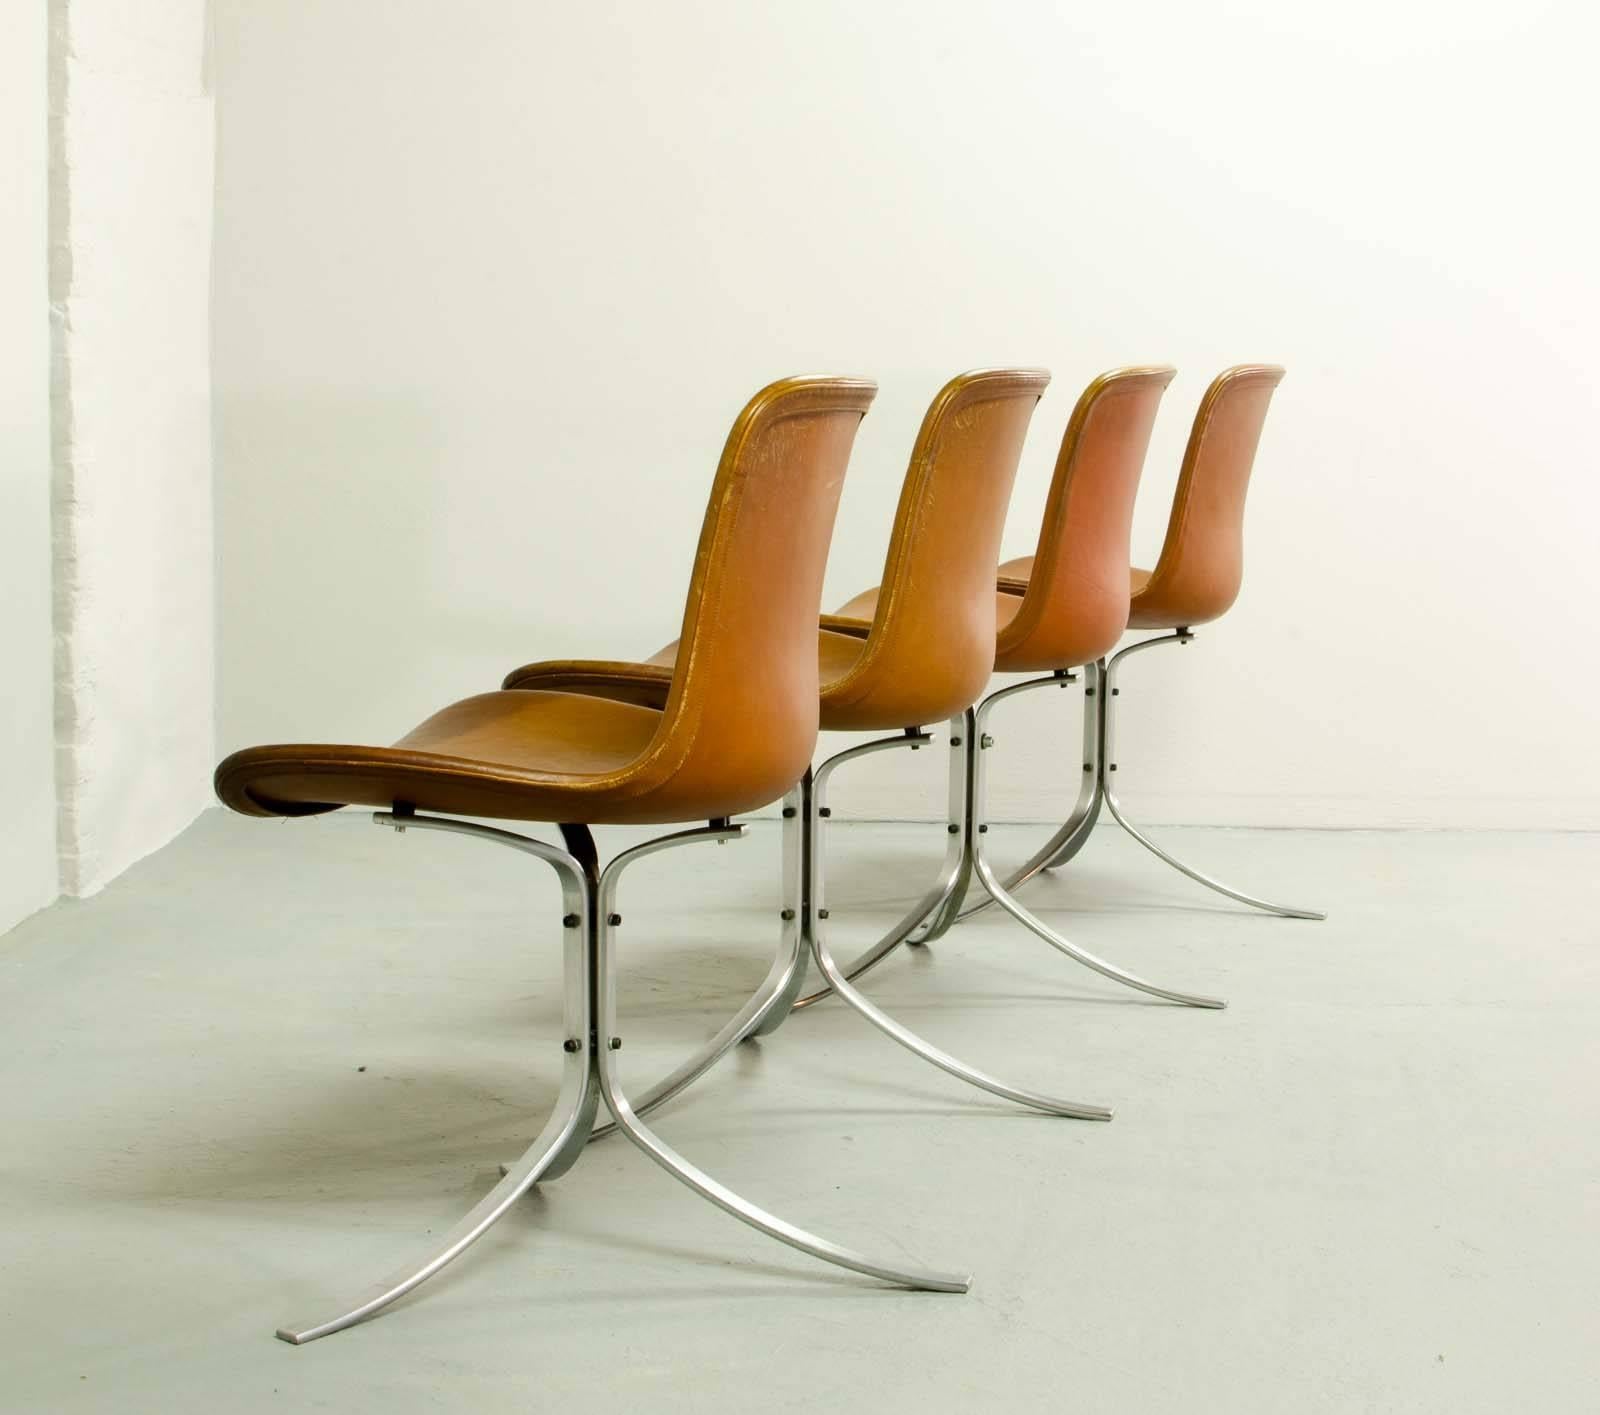 Mid-20th Century Superb First Edition PK9 Dining Chairs by Poul Kjaerholm for E. Kold Christensen